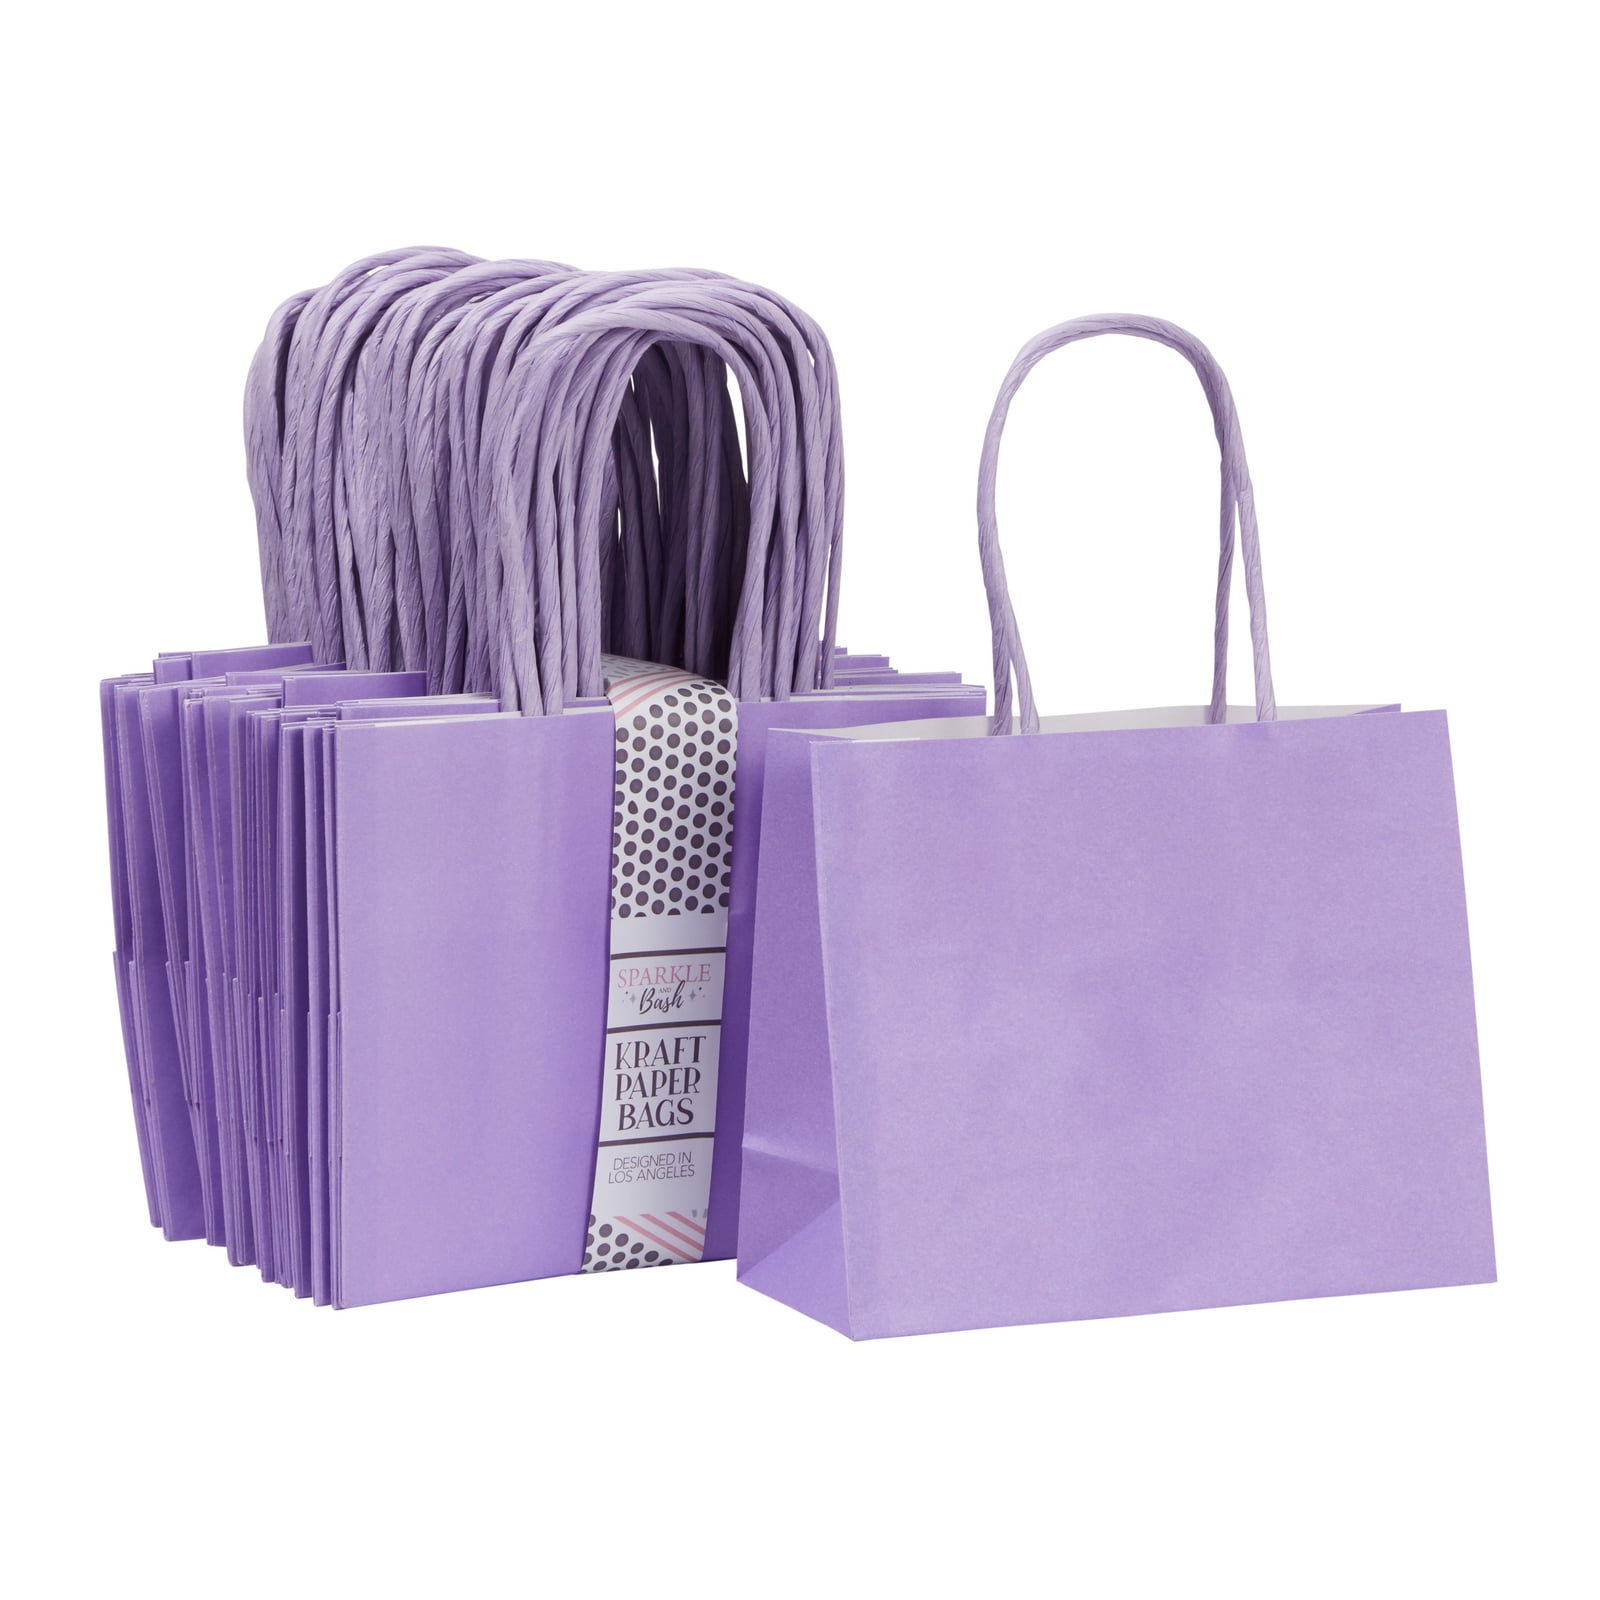 gift bag 13x10.5x5.5/L 48/96s purple glossy - solid color gift bags